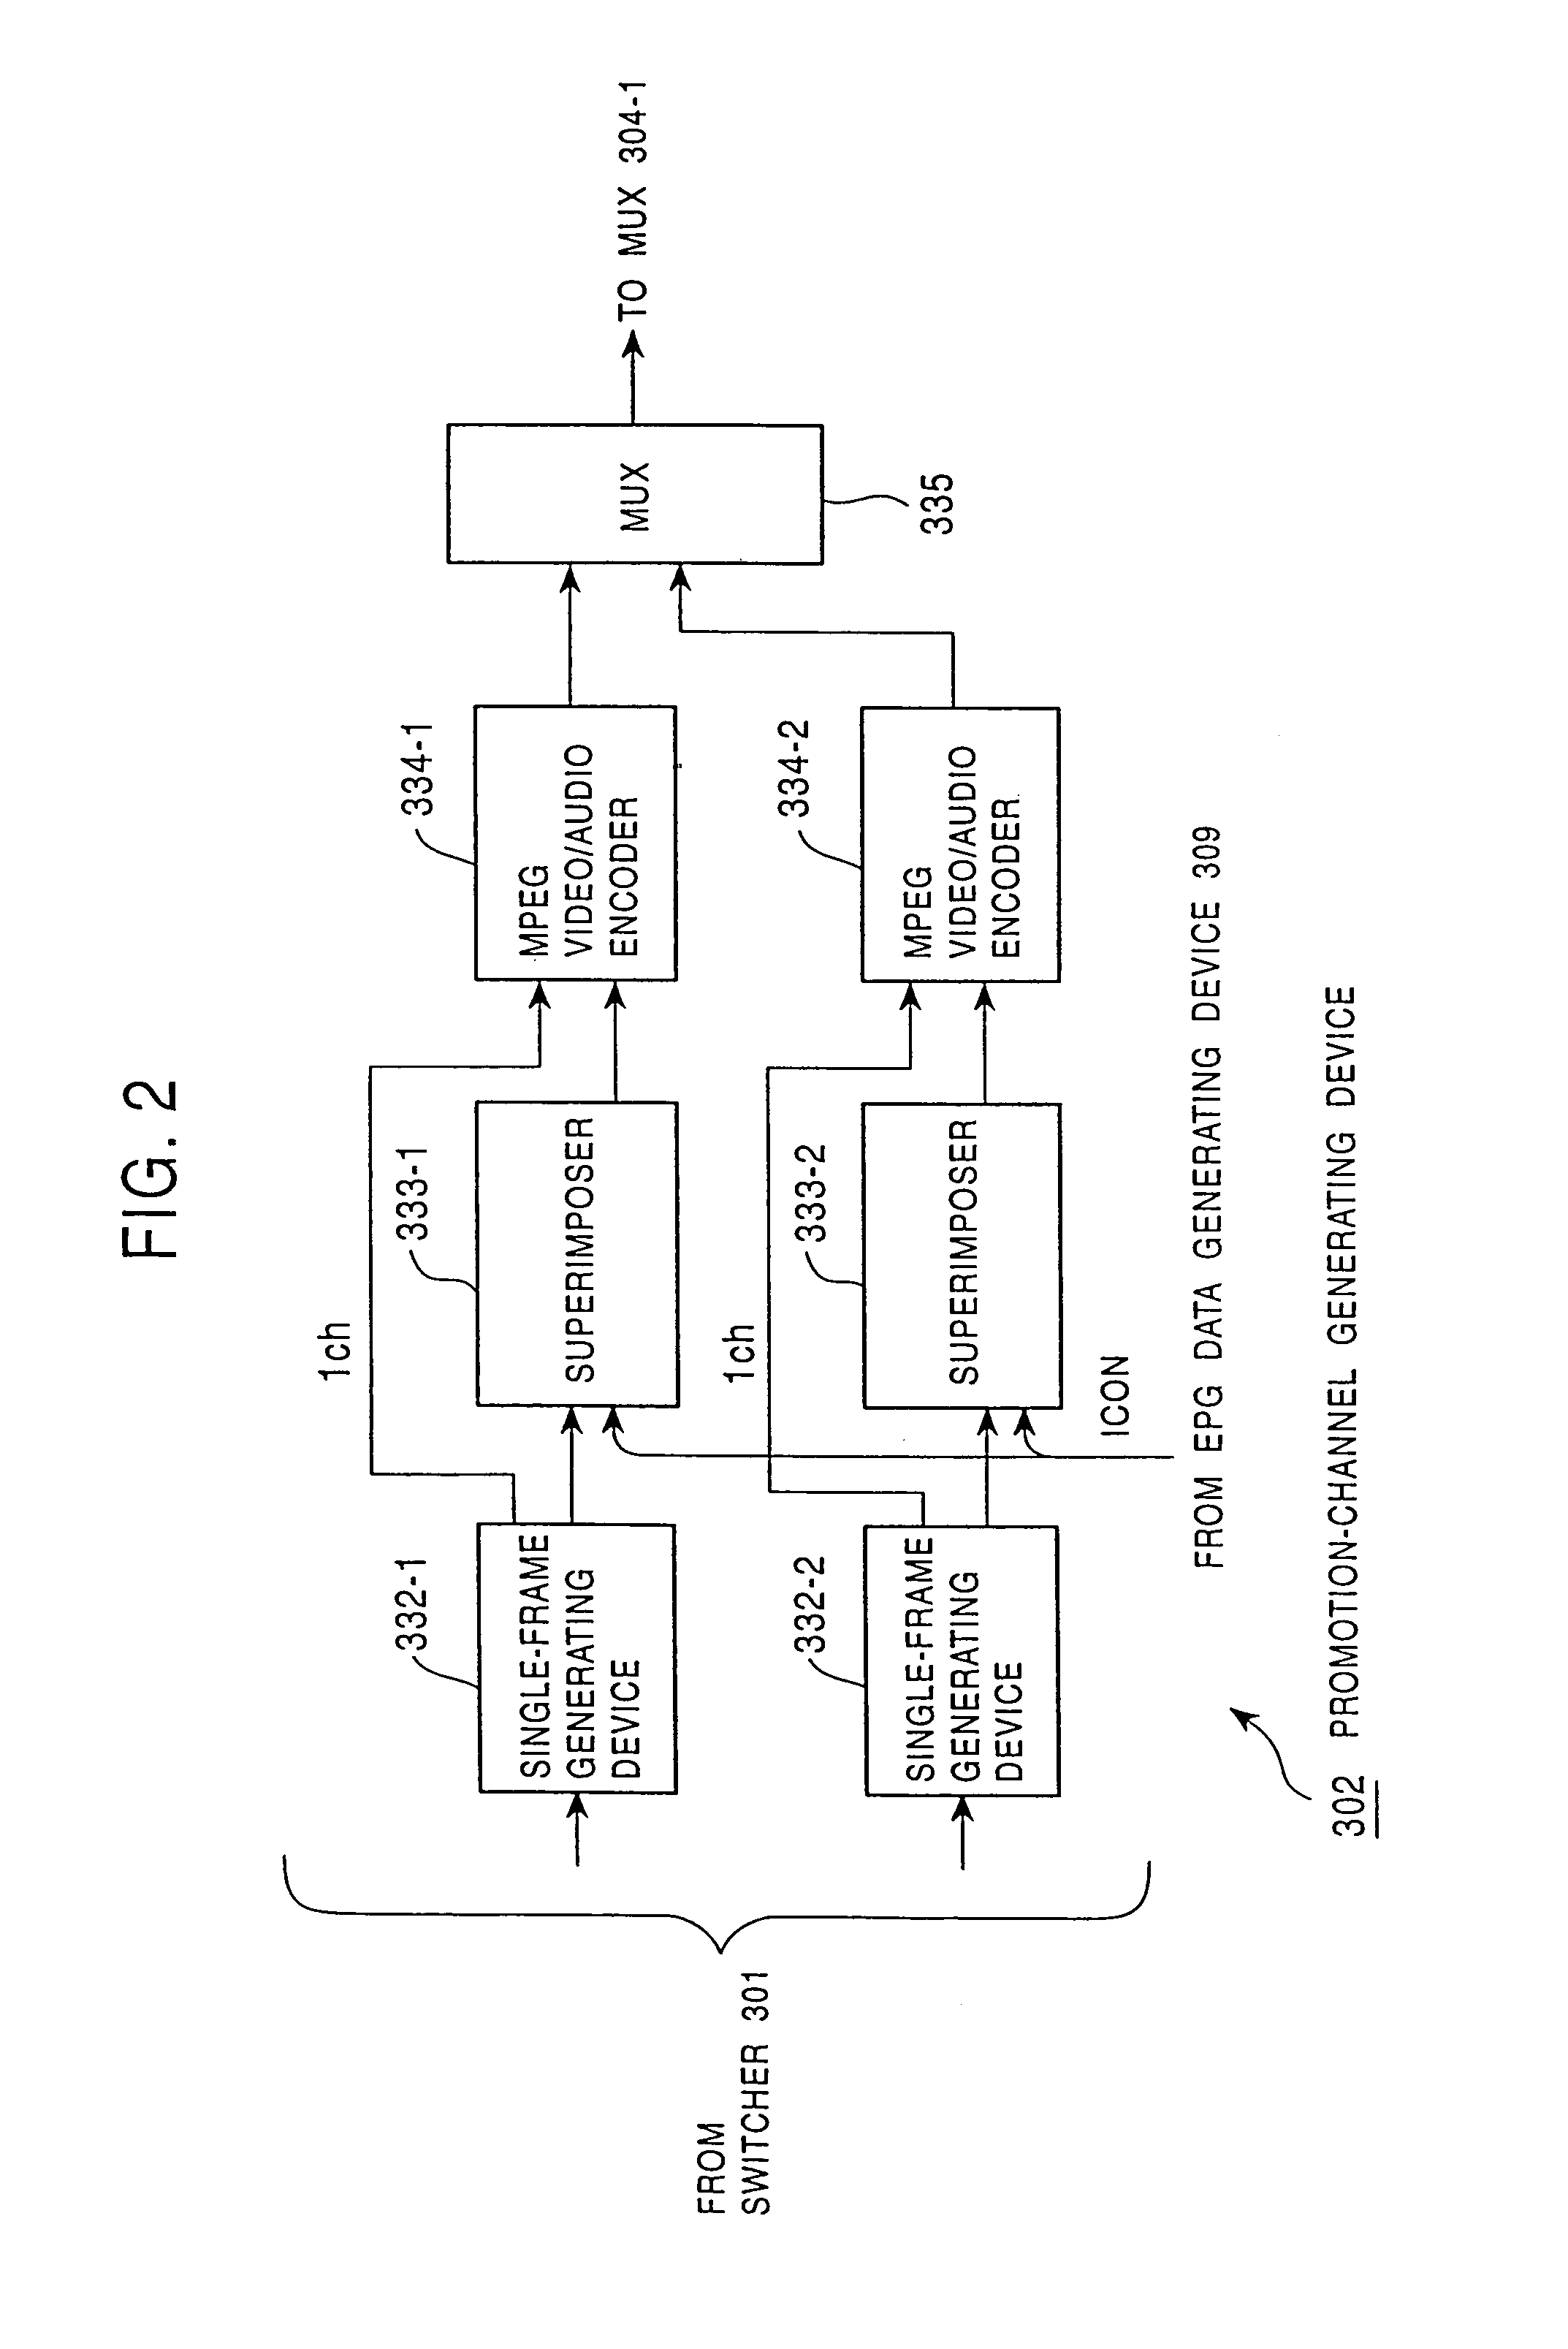 Electronic program guide system using images of reduced size to identify respective programs